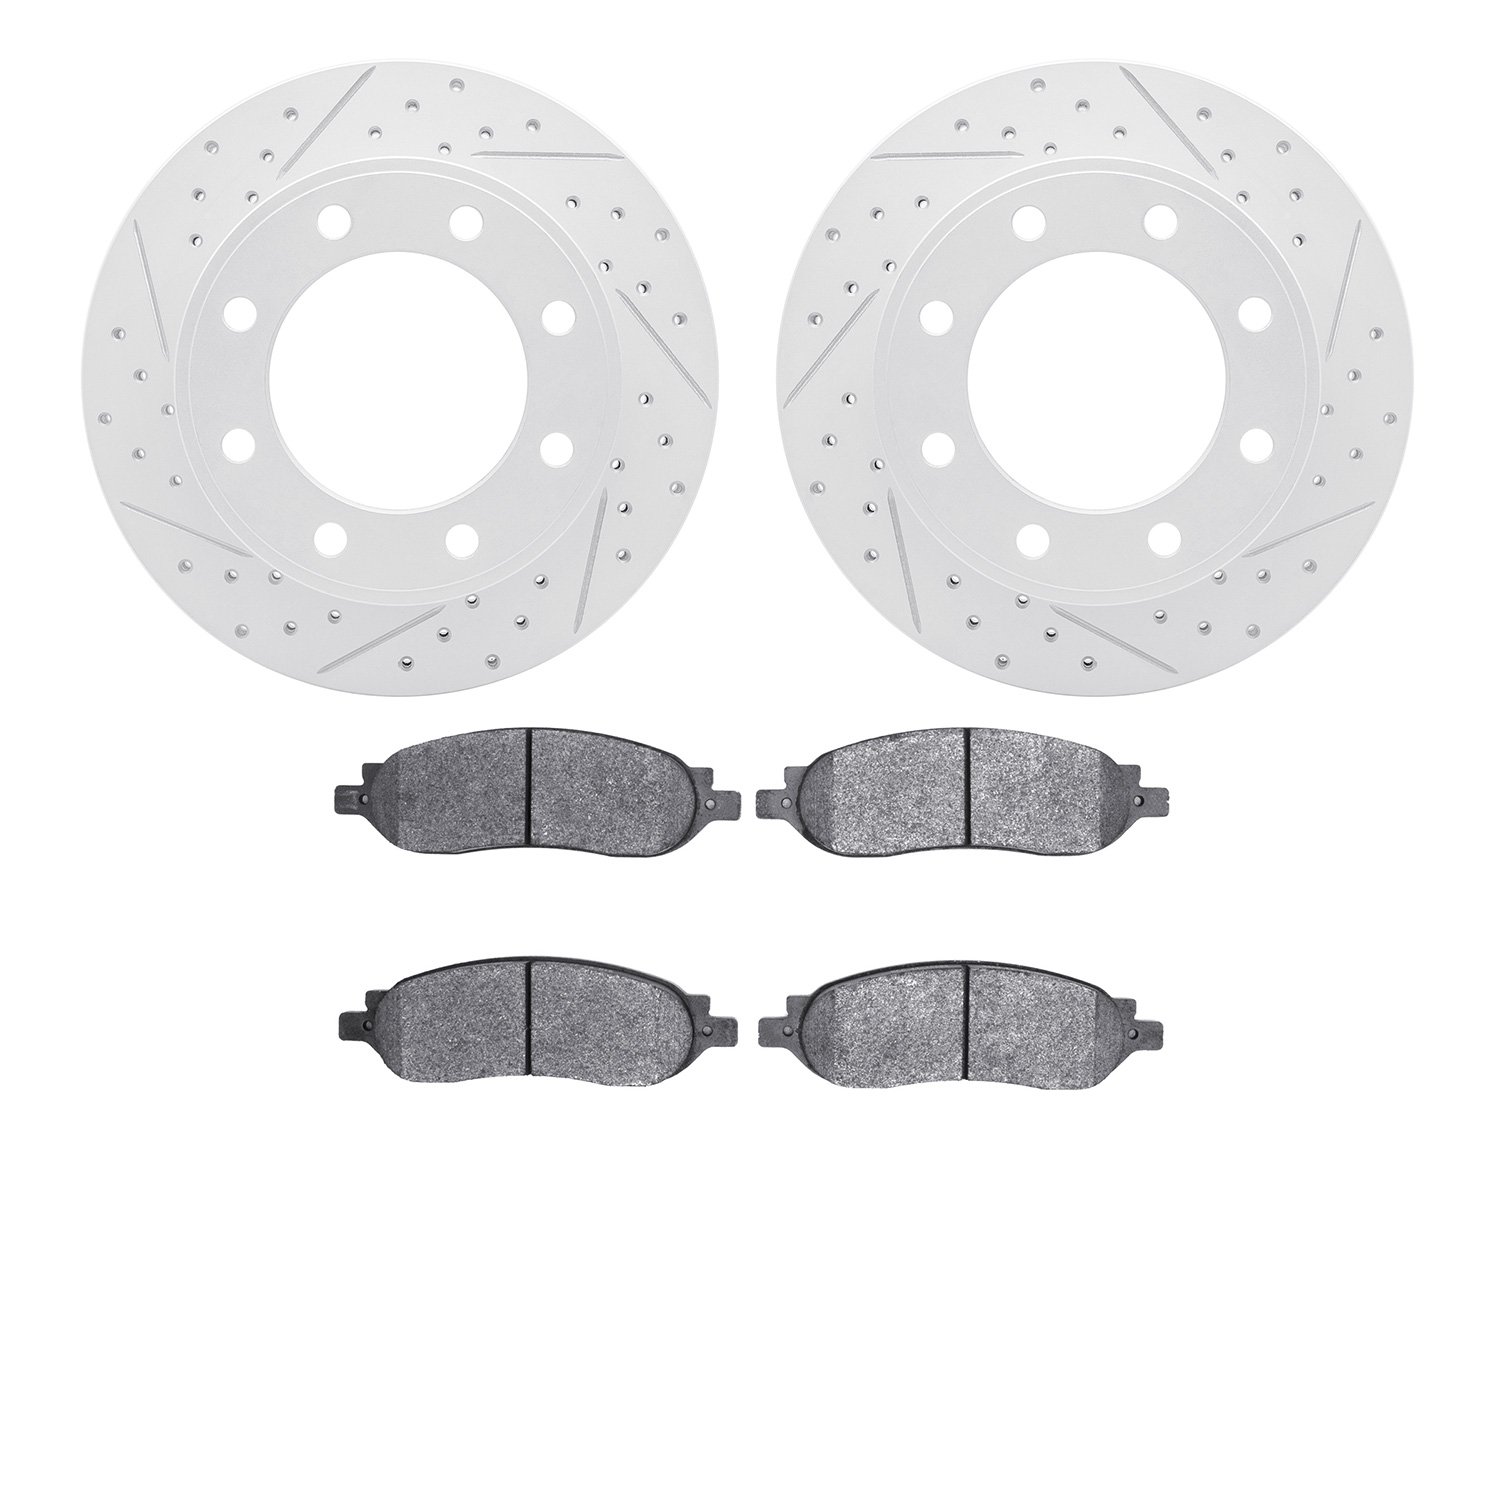 2502-54180 Geoperformance Drilled/Slotted Rotors w/5000 Advanced Brake Pads Kit, 2005-2007 Ford/Lincoln/Mercury/Mazda, Position: